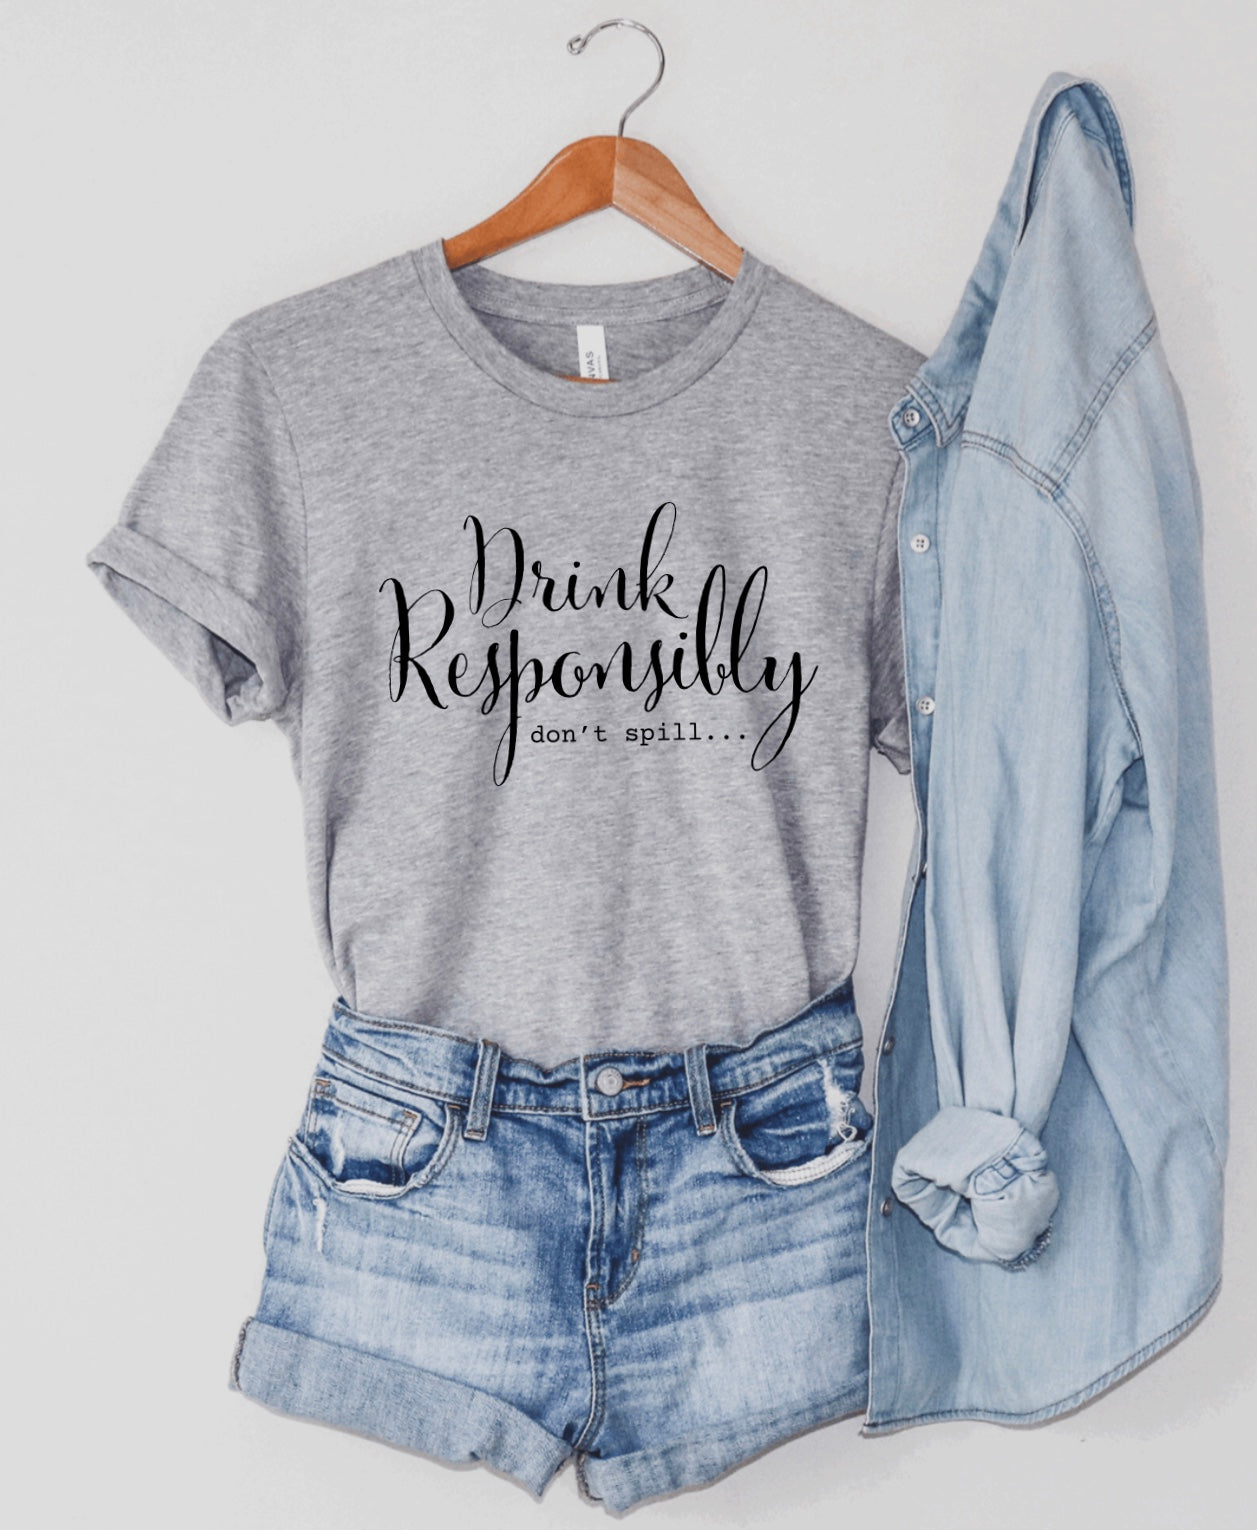 Drink responsibly don't spill t-shirt